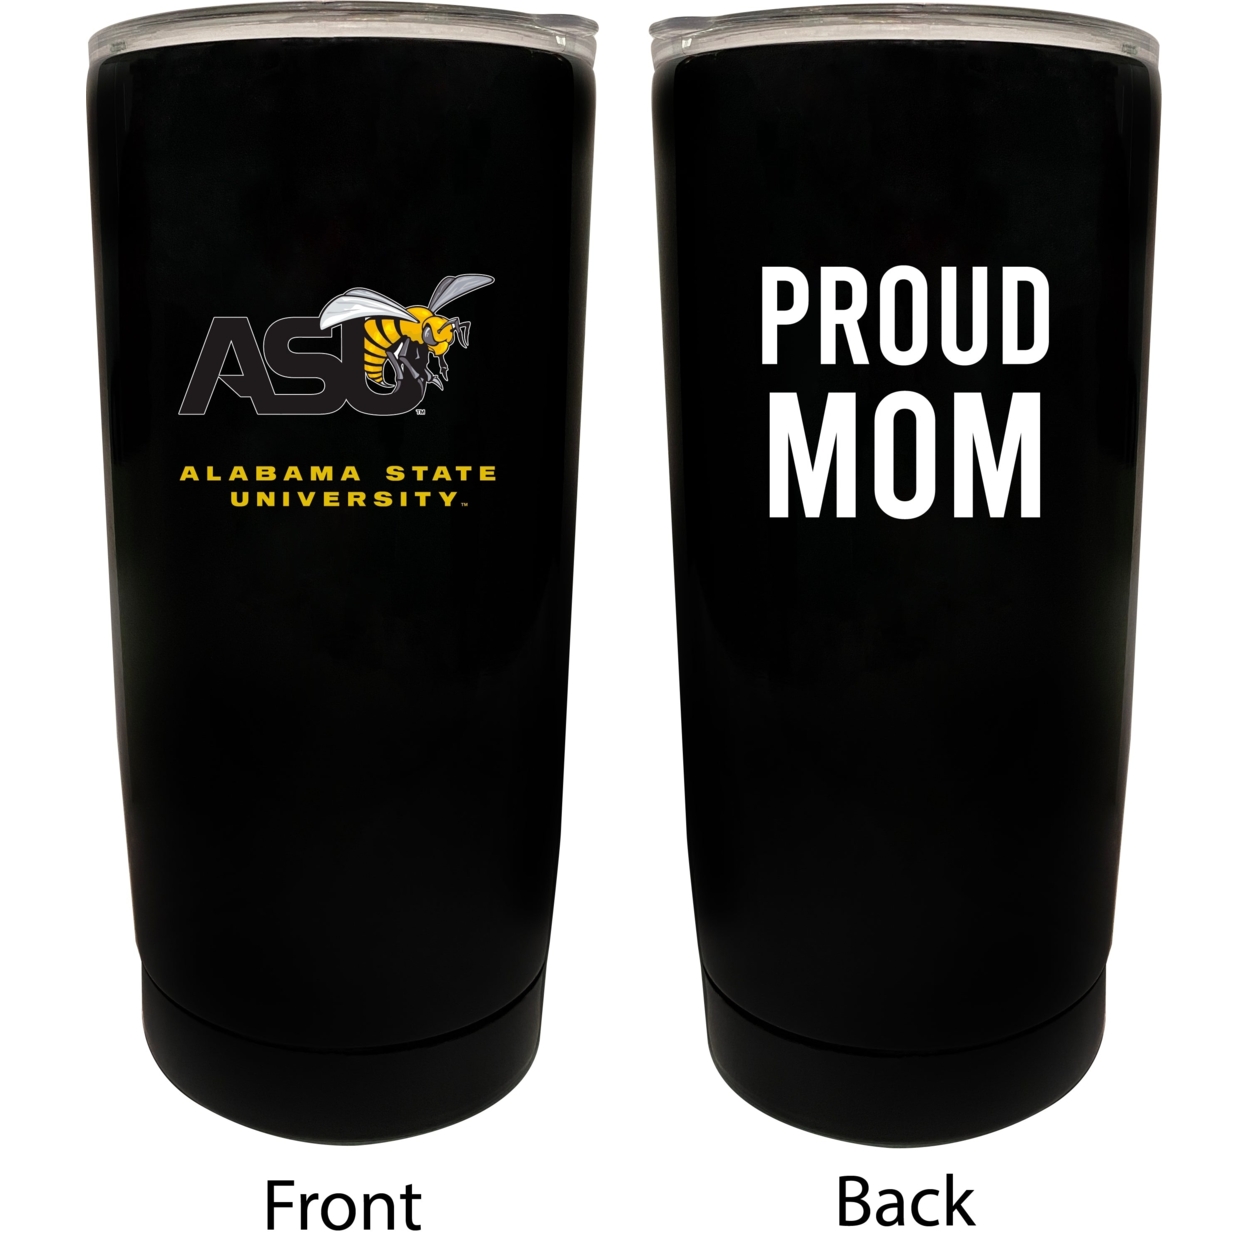 Alabama State University Proud Mom 16 Oz Insulated Stainless Steel Tumblers